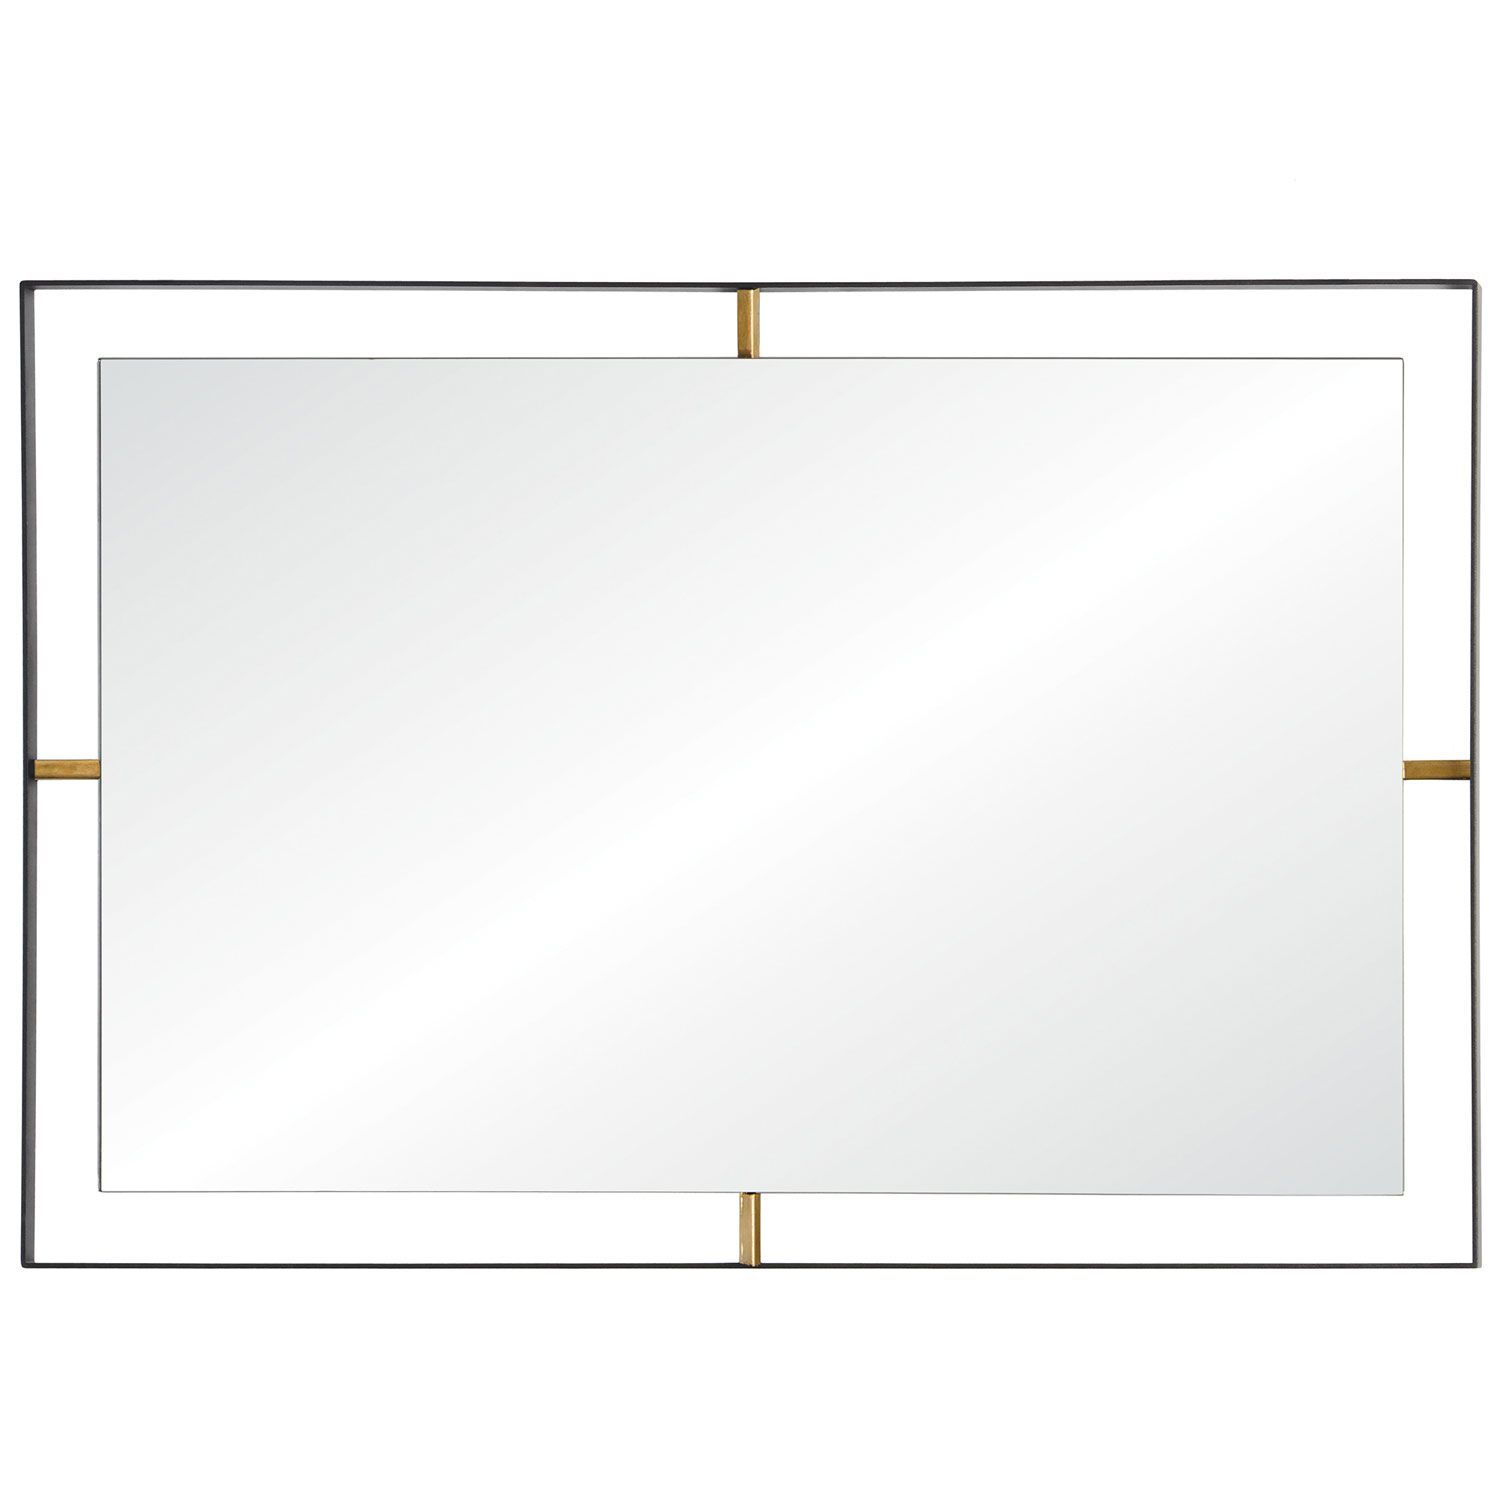 Varaluz Casa Framed Matte Black Rectangle Mirror 610030 | Bellacor Within Matte Black Square Wall Mirrors (View 2 of 15)